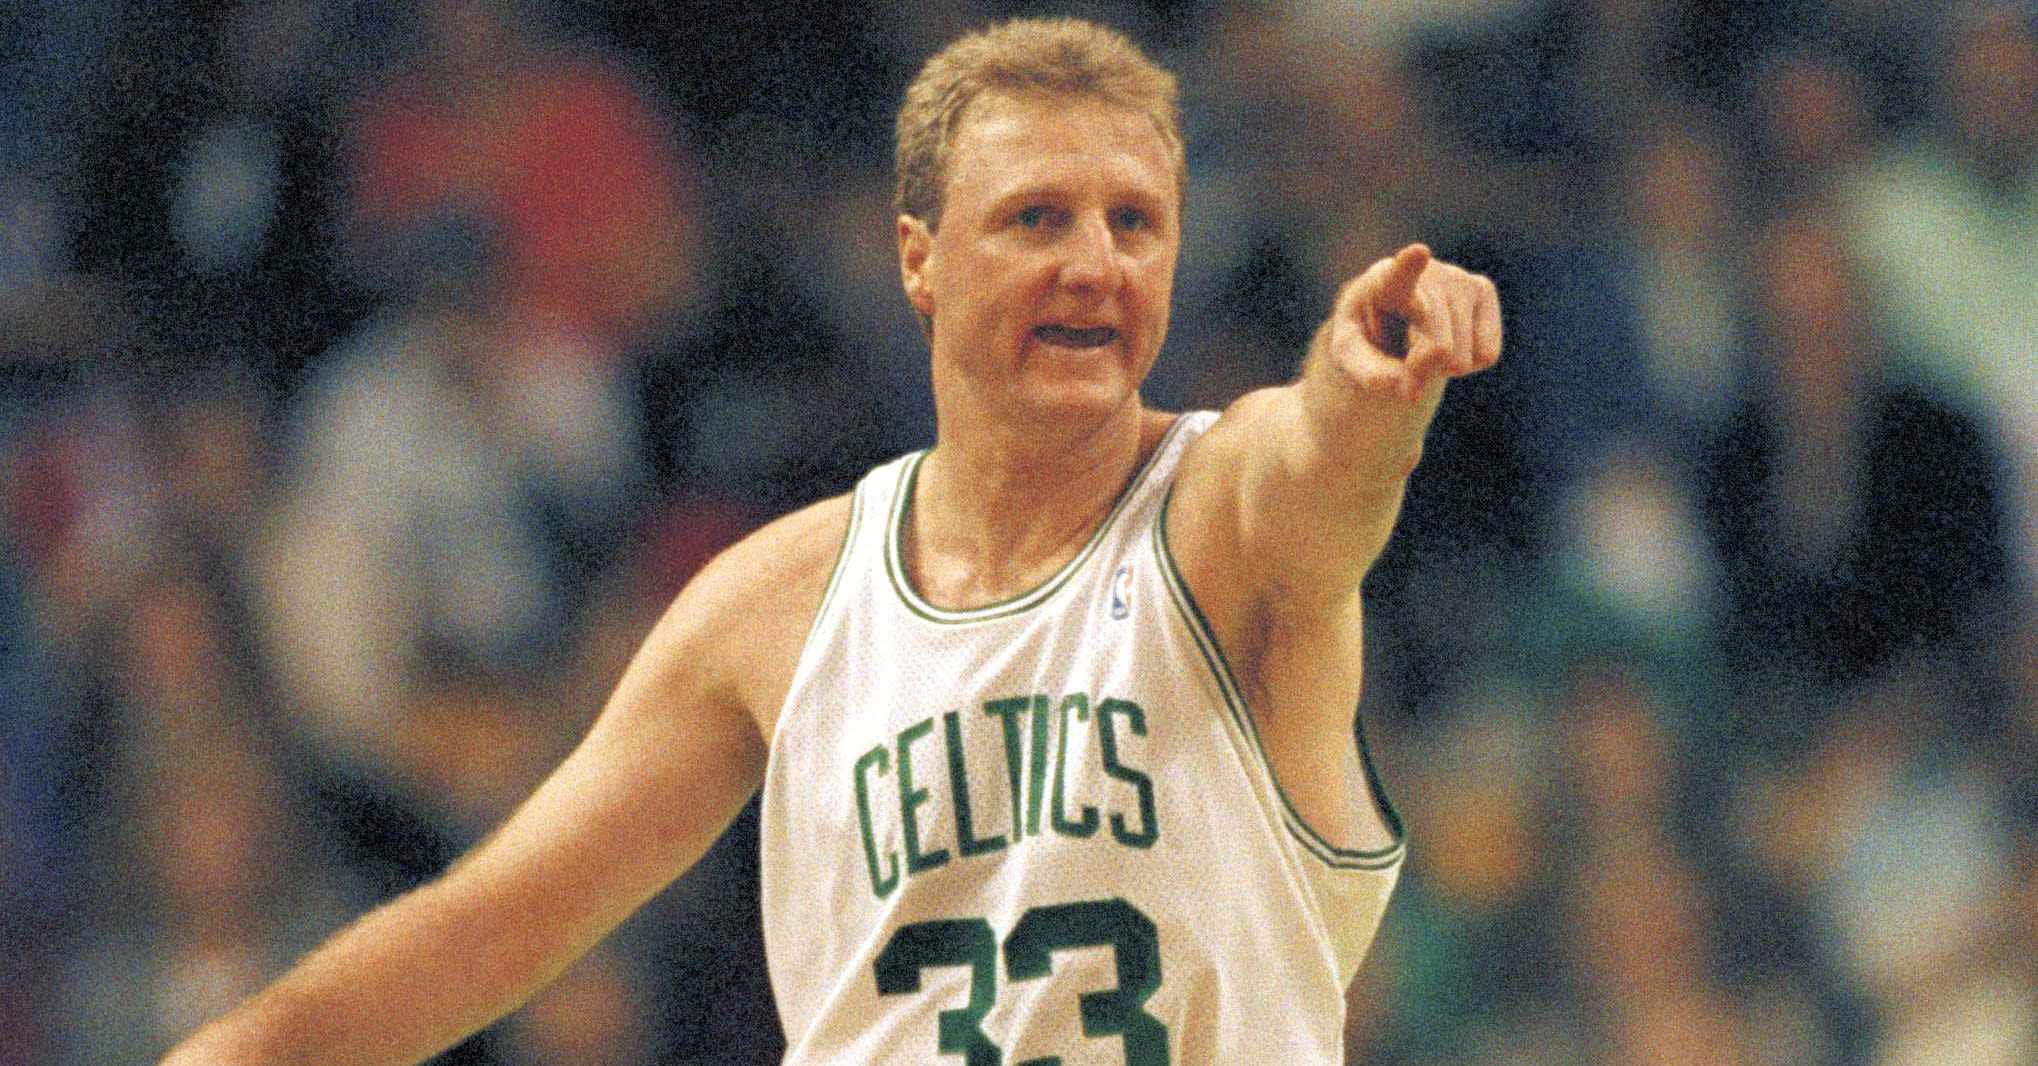 Larry Bird's rise to college hoops superstar: The journey from